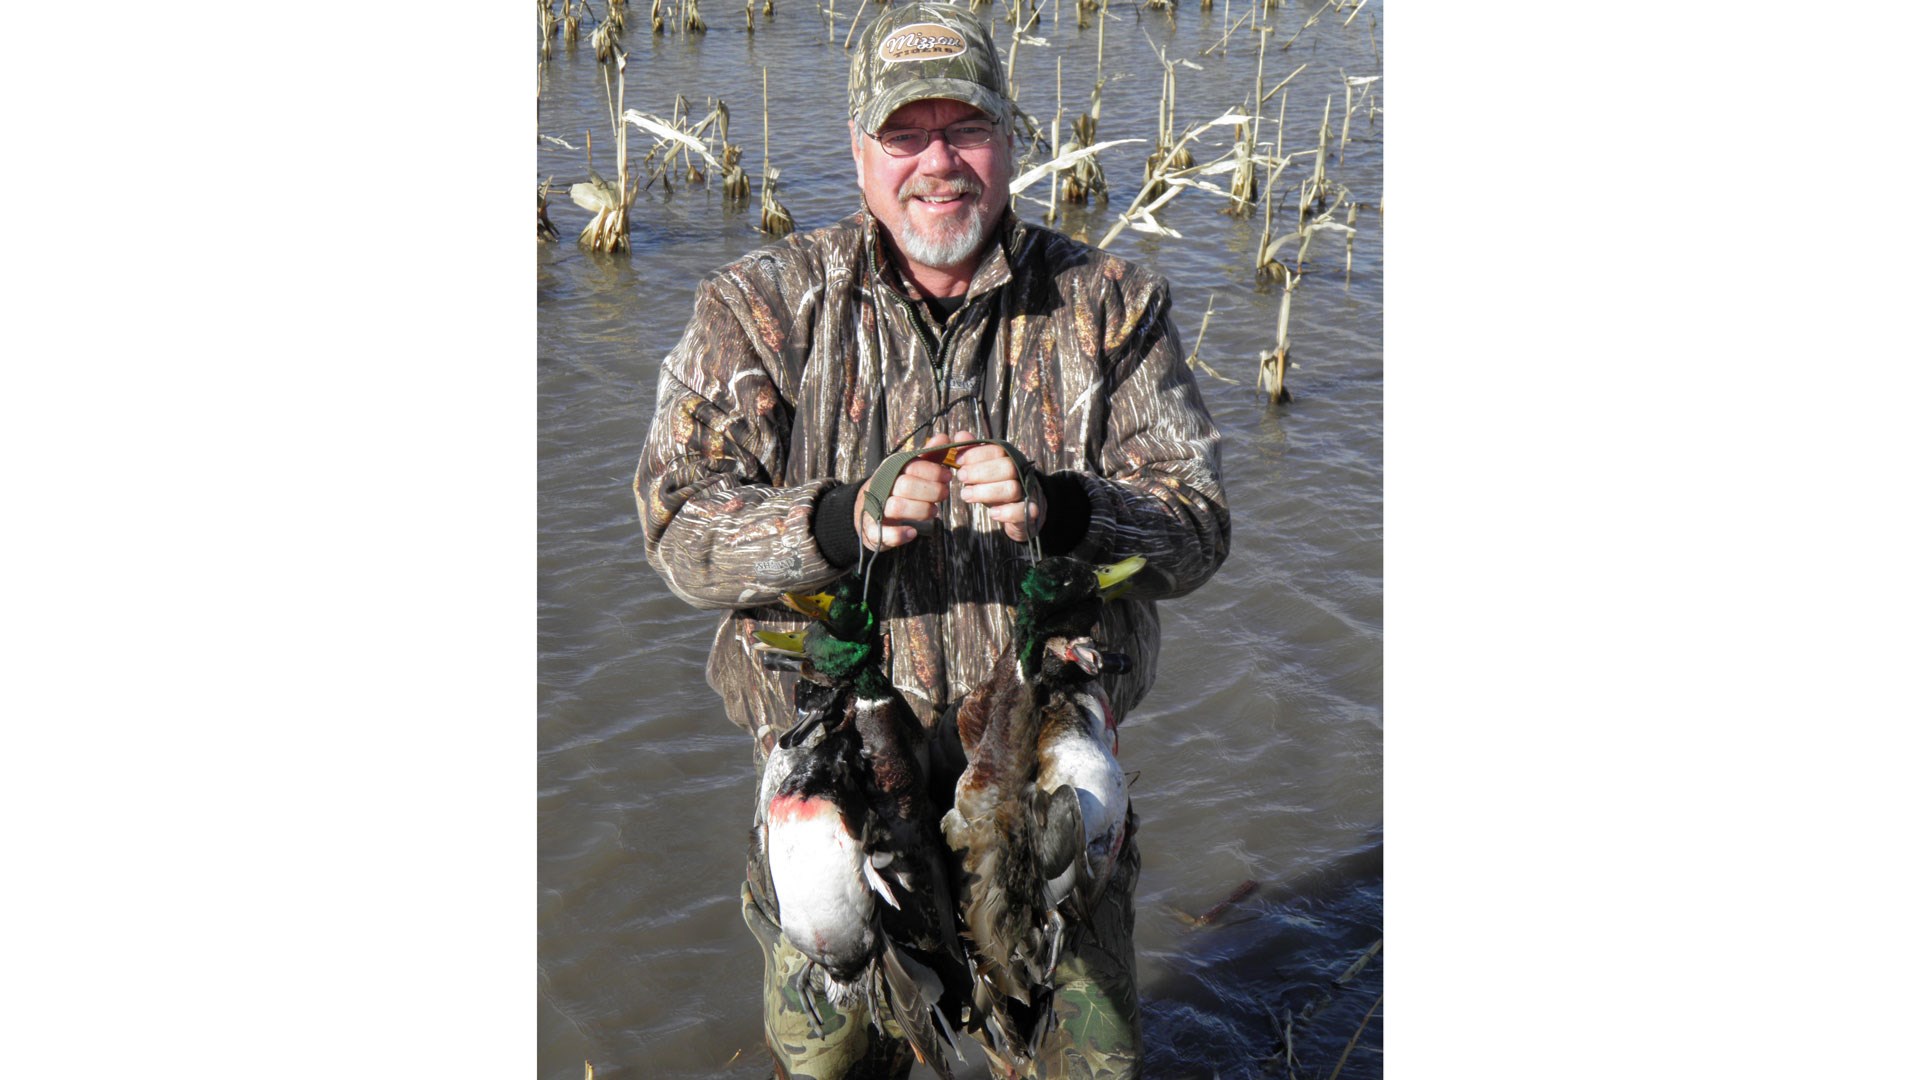 Mike Roux with ducks